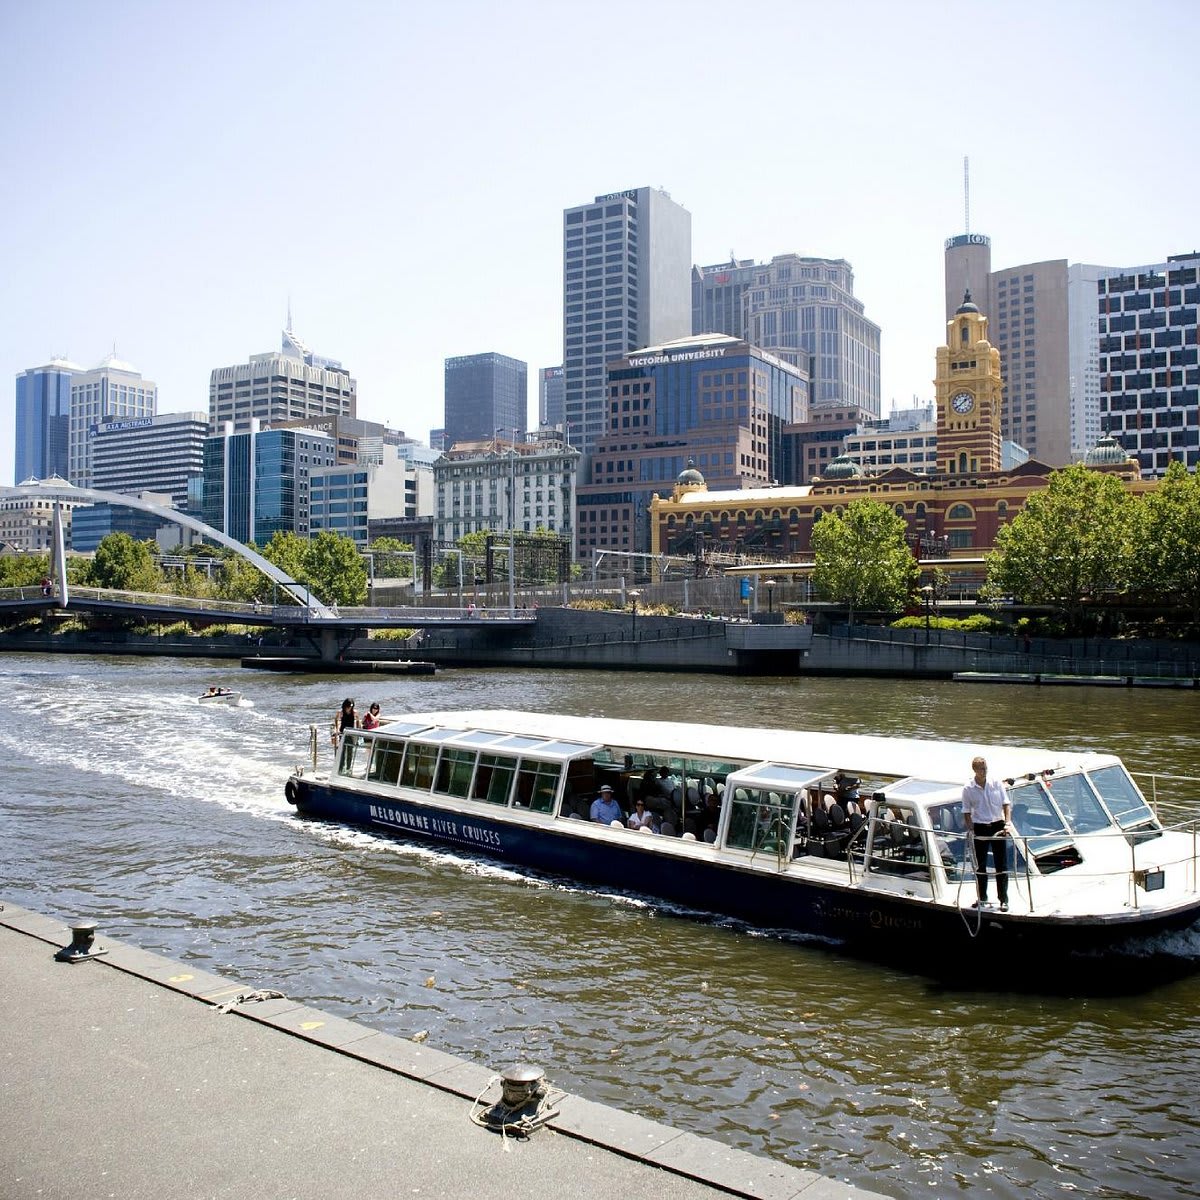 Go on a scenic river cruise